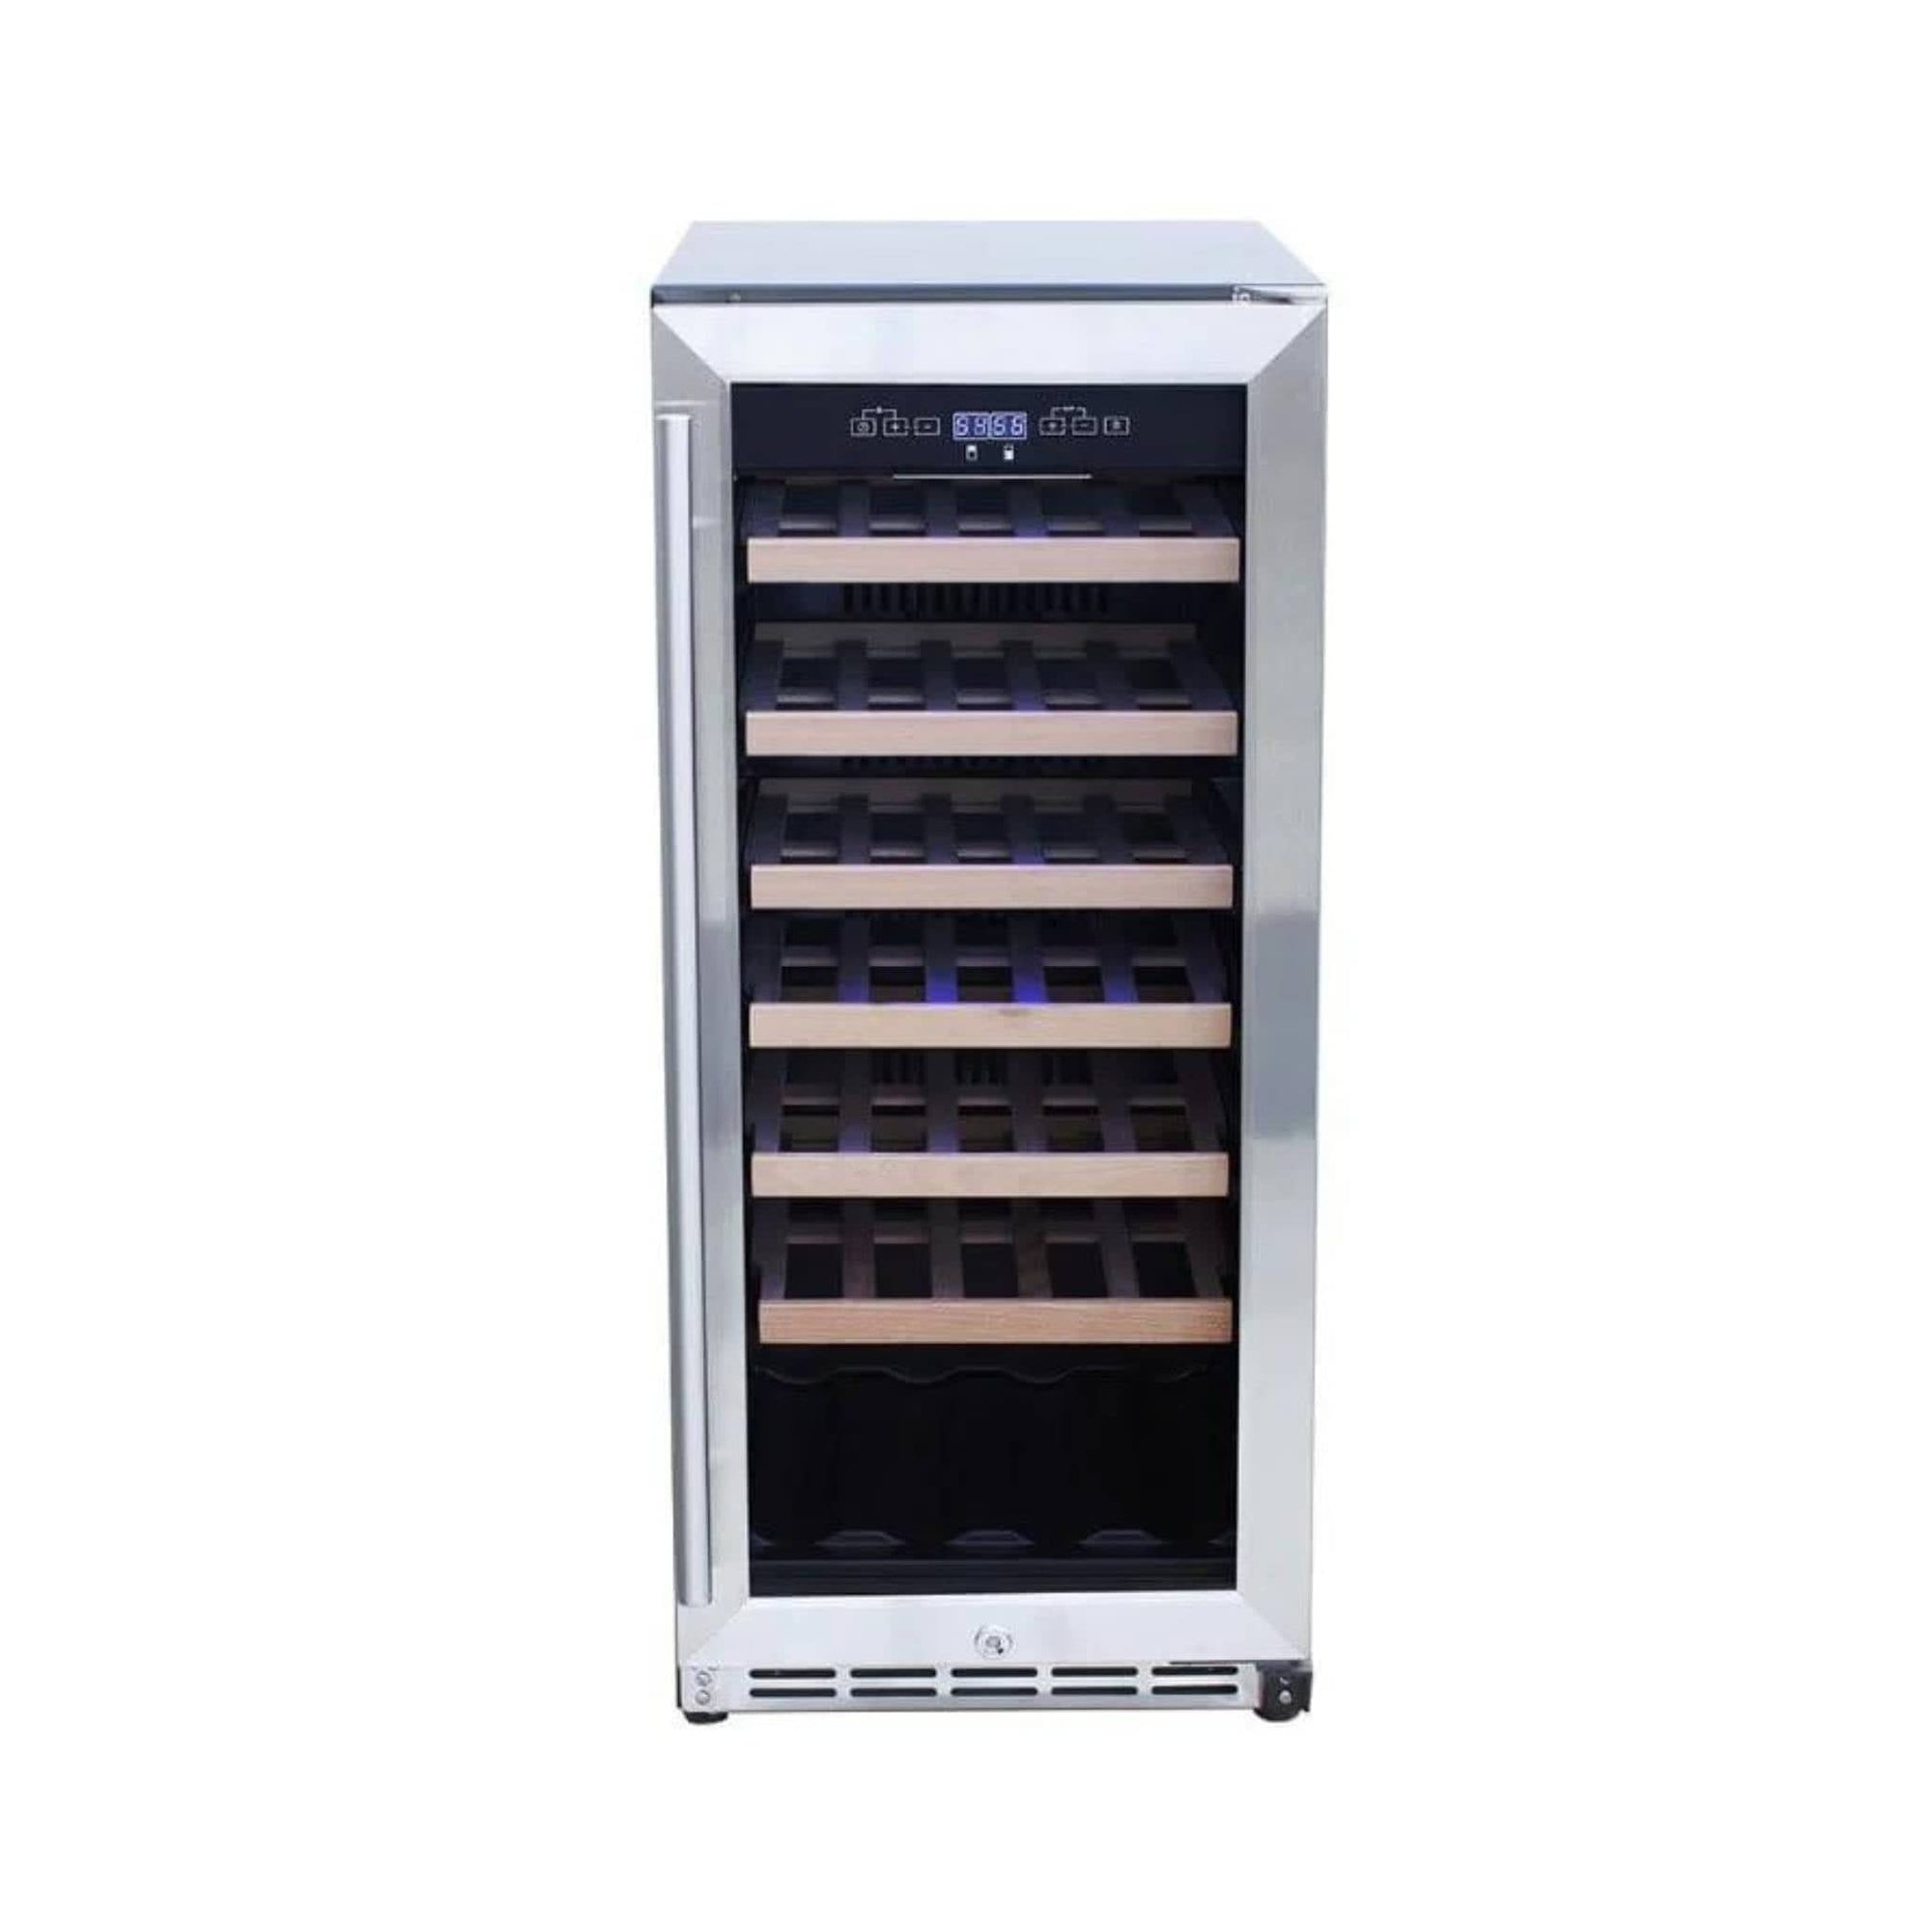 Summerset 15" Outdoor Rated Dual Zone Wine Cooler - Culinary Hardware